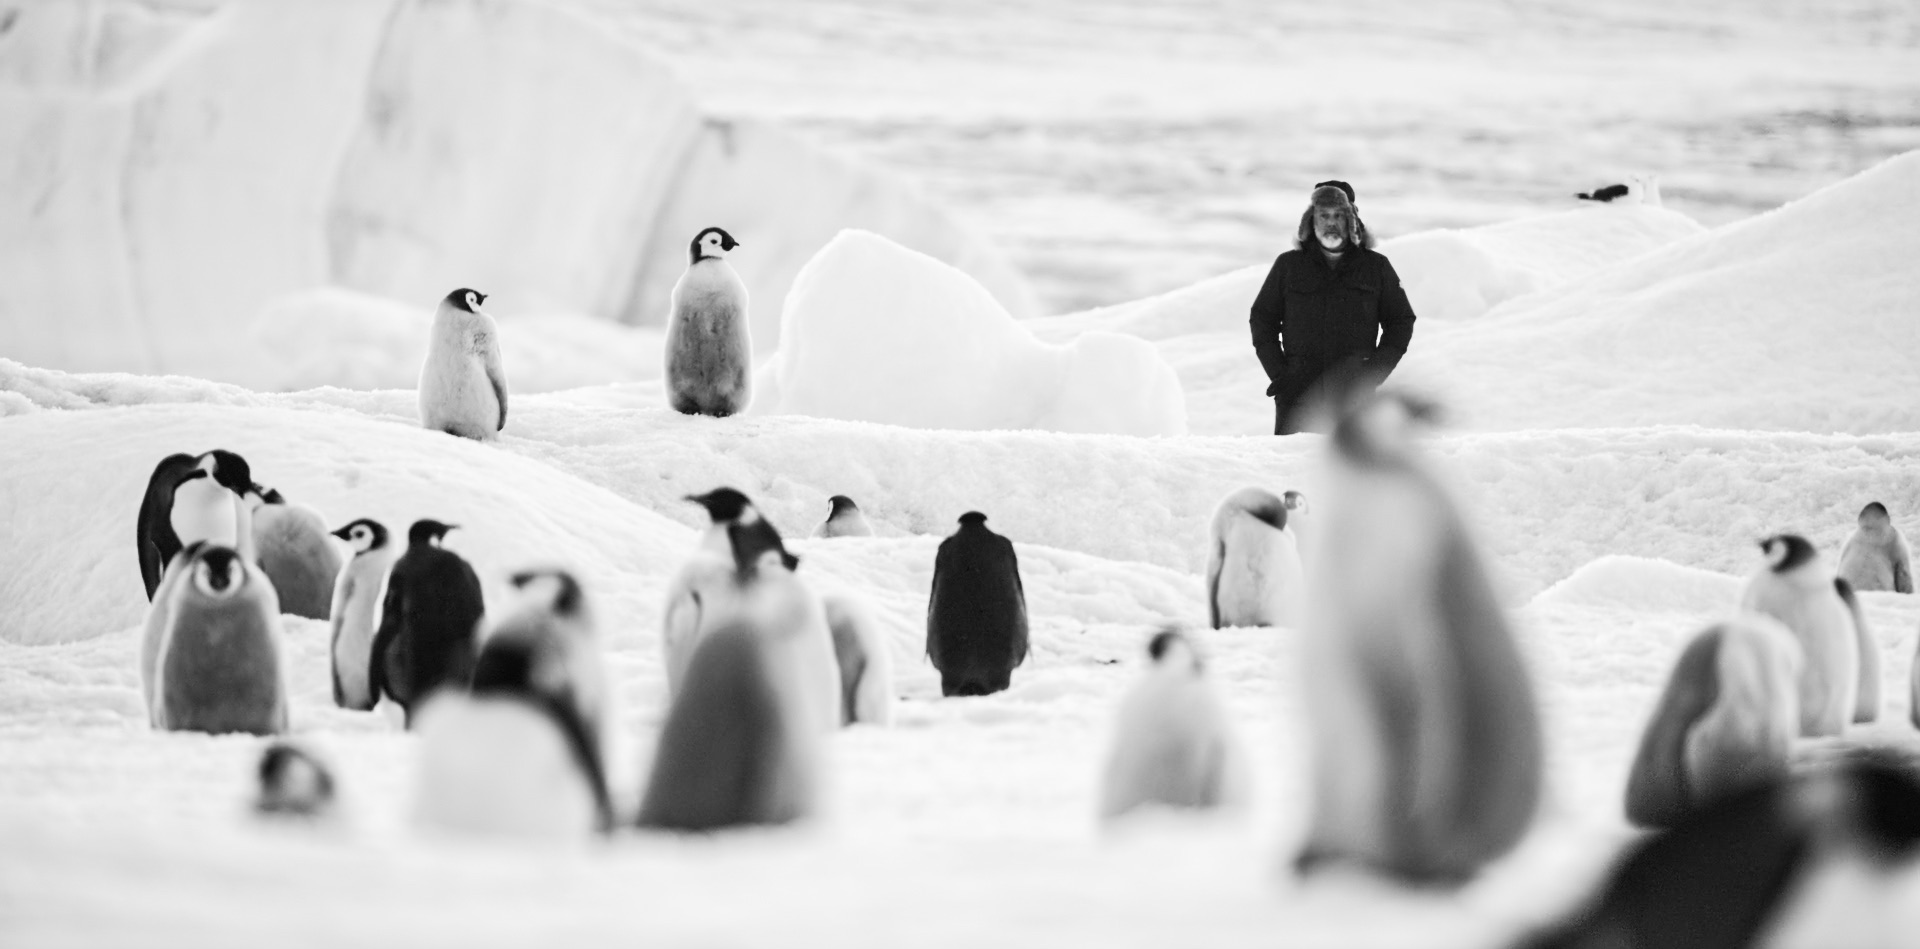 Luc Jacquet with penguins in Antarctica